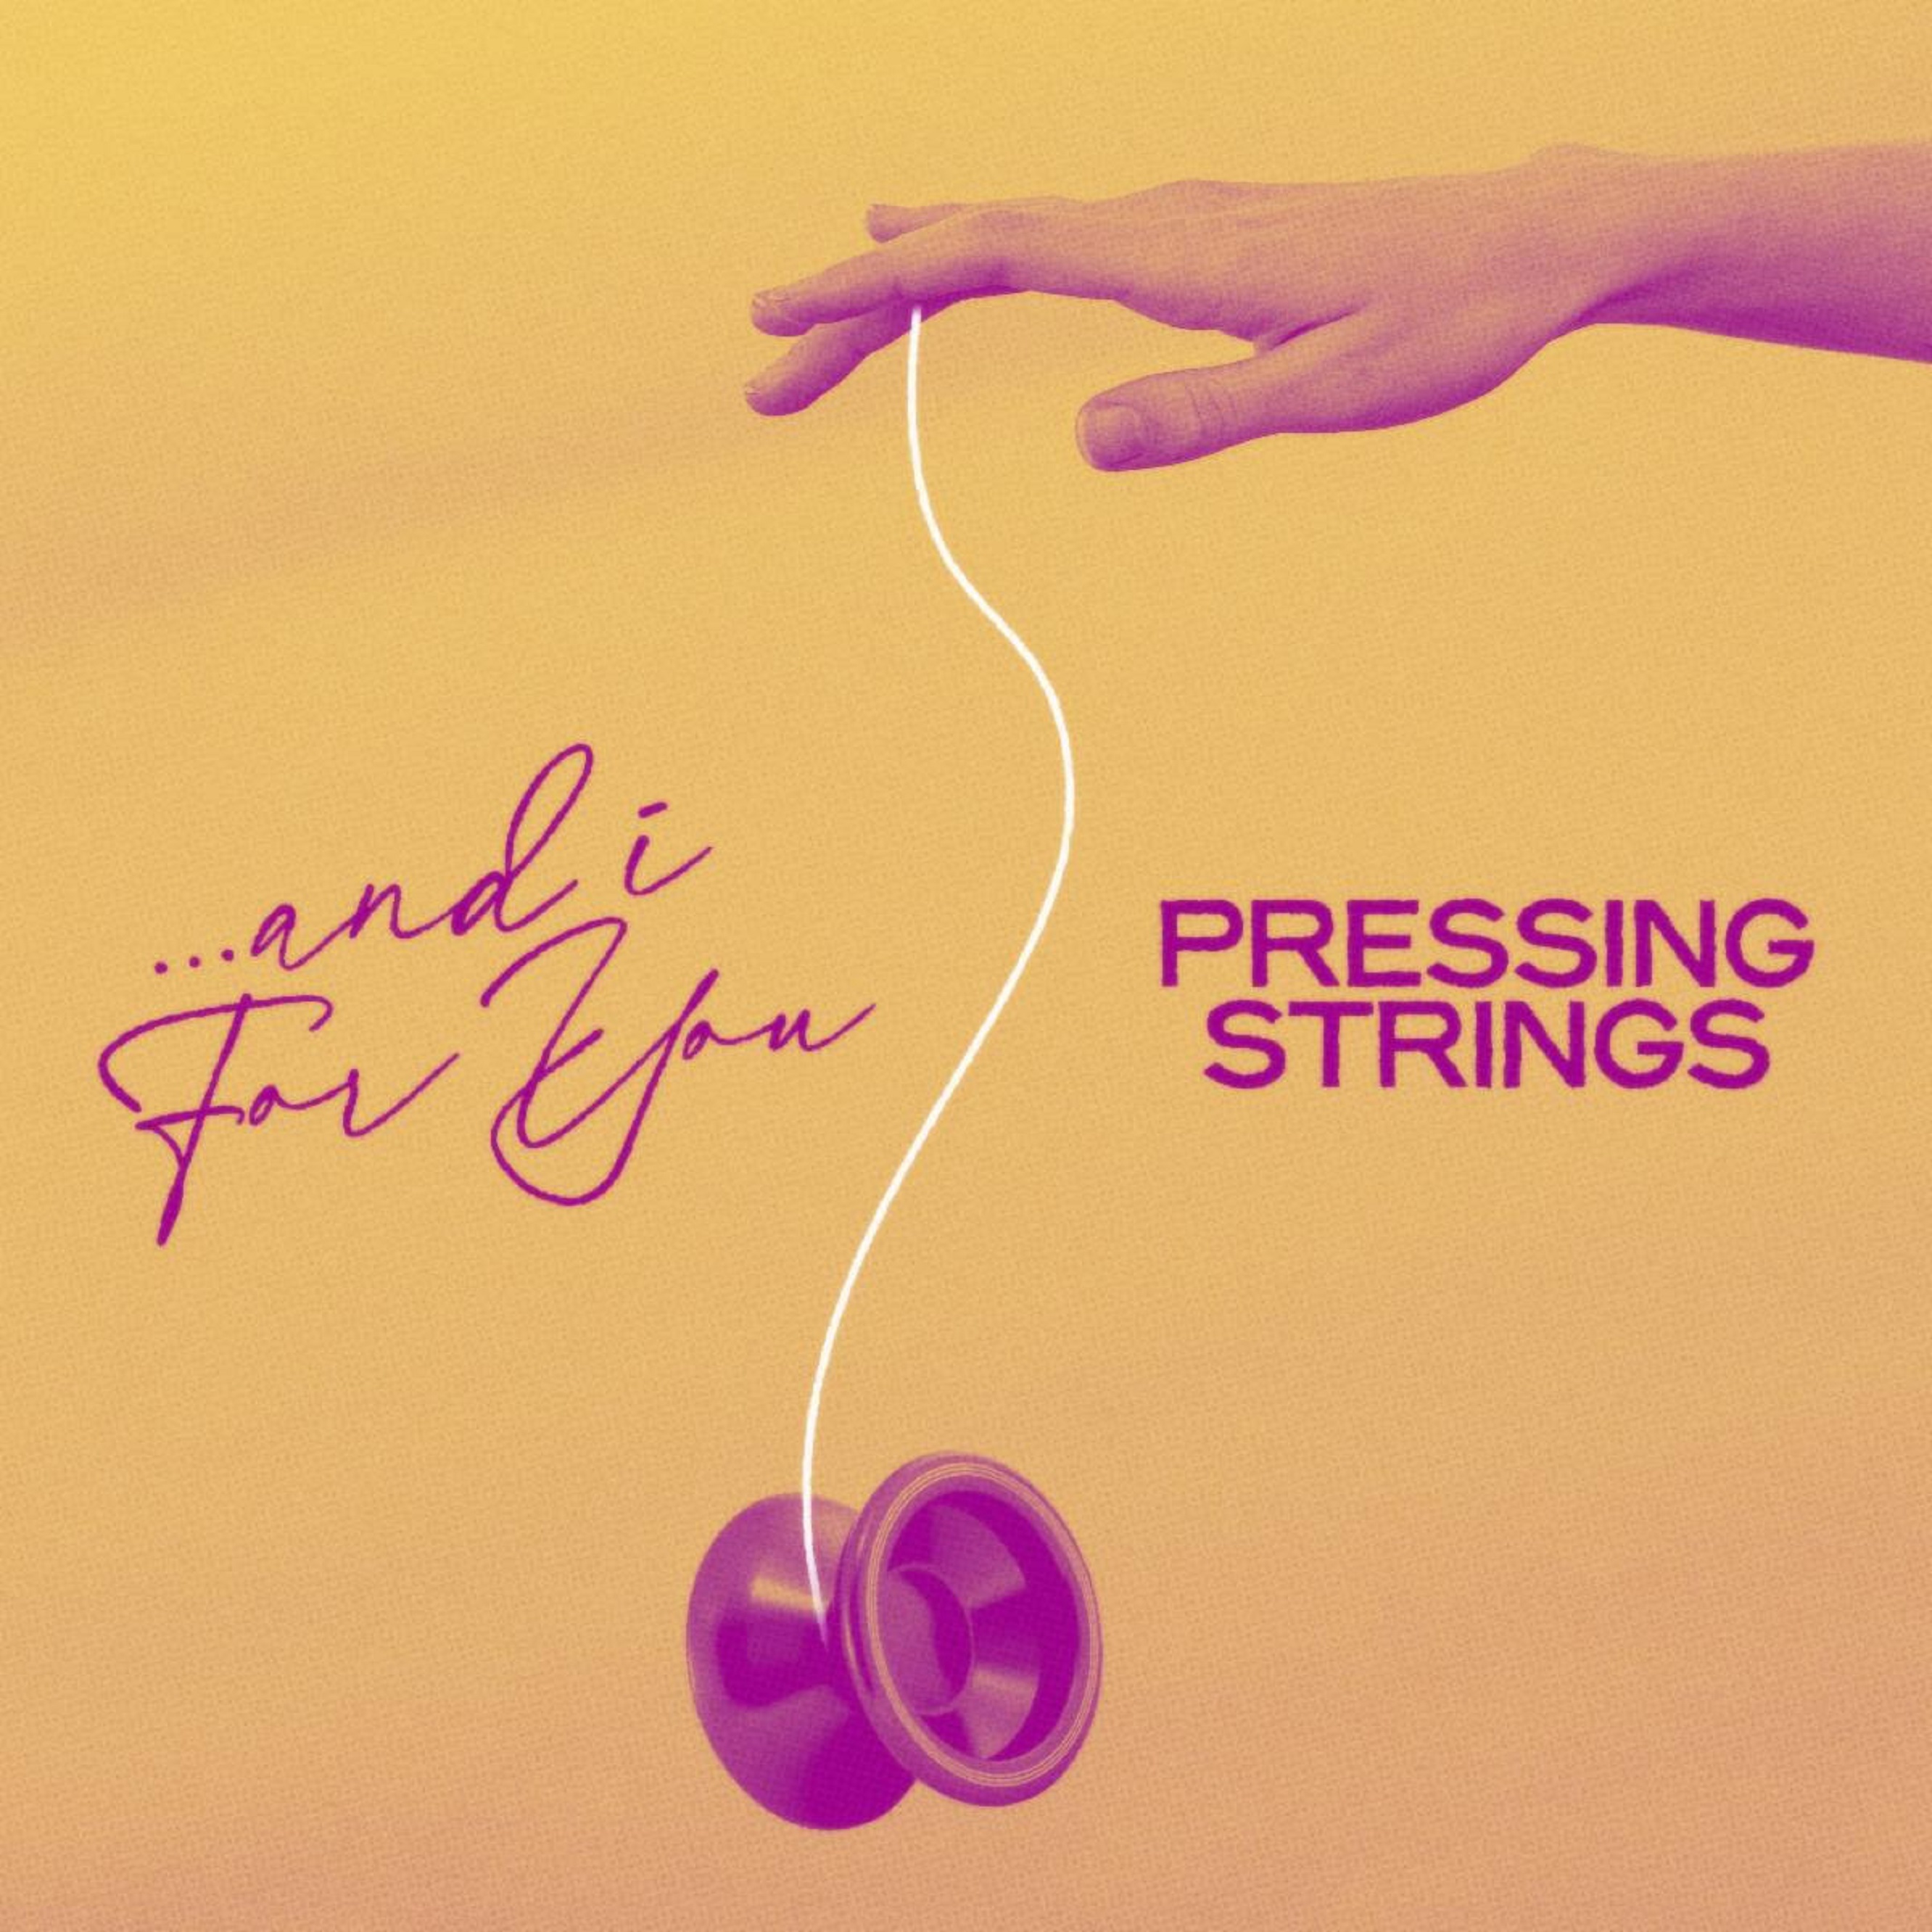 Pressing Strings Releases New Single “Your Love" // Announces New Studio Album '…And I For You' Out July 14